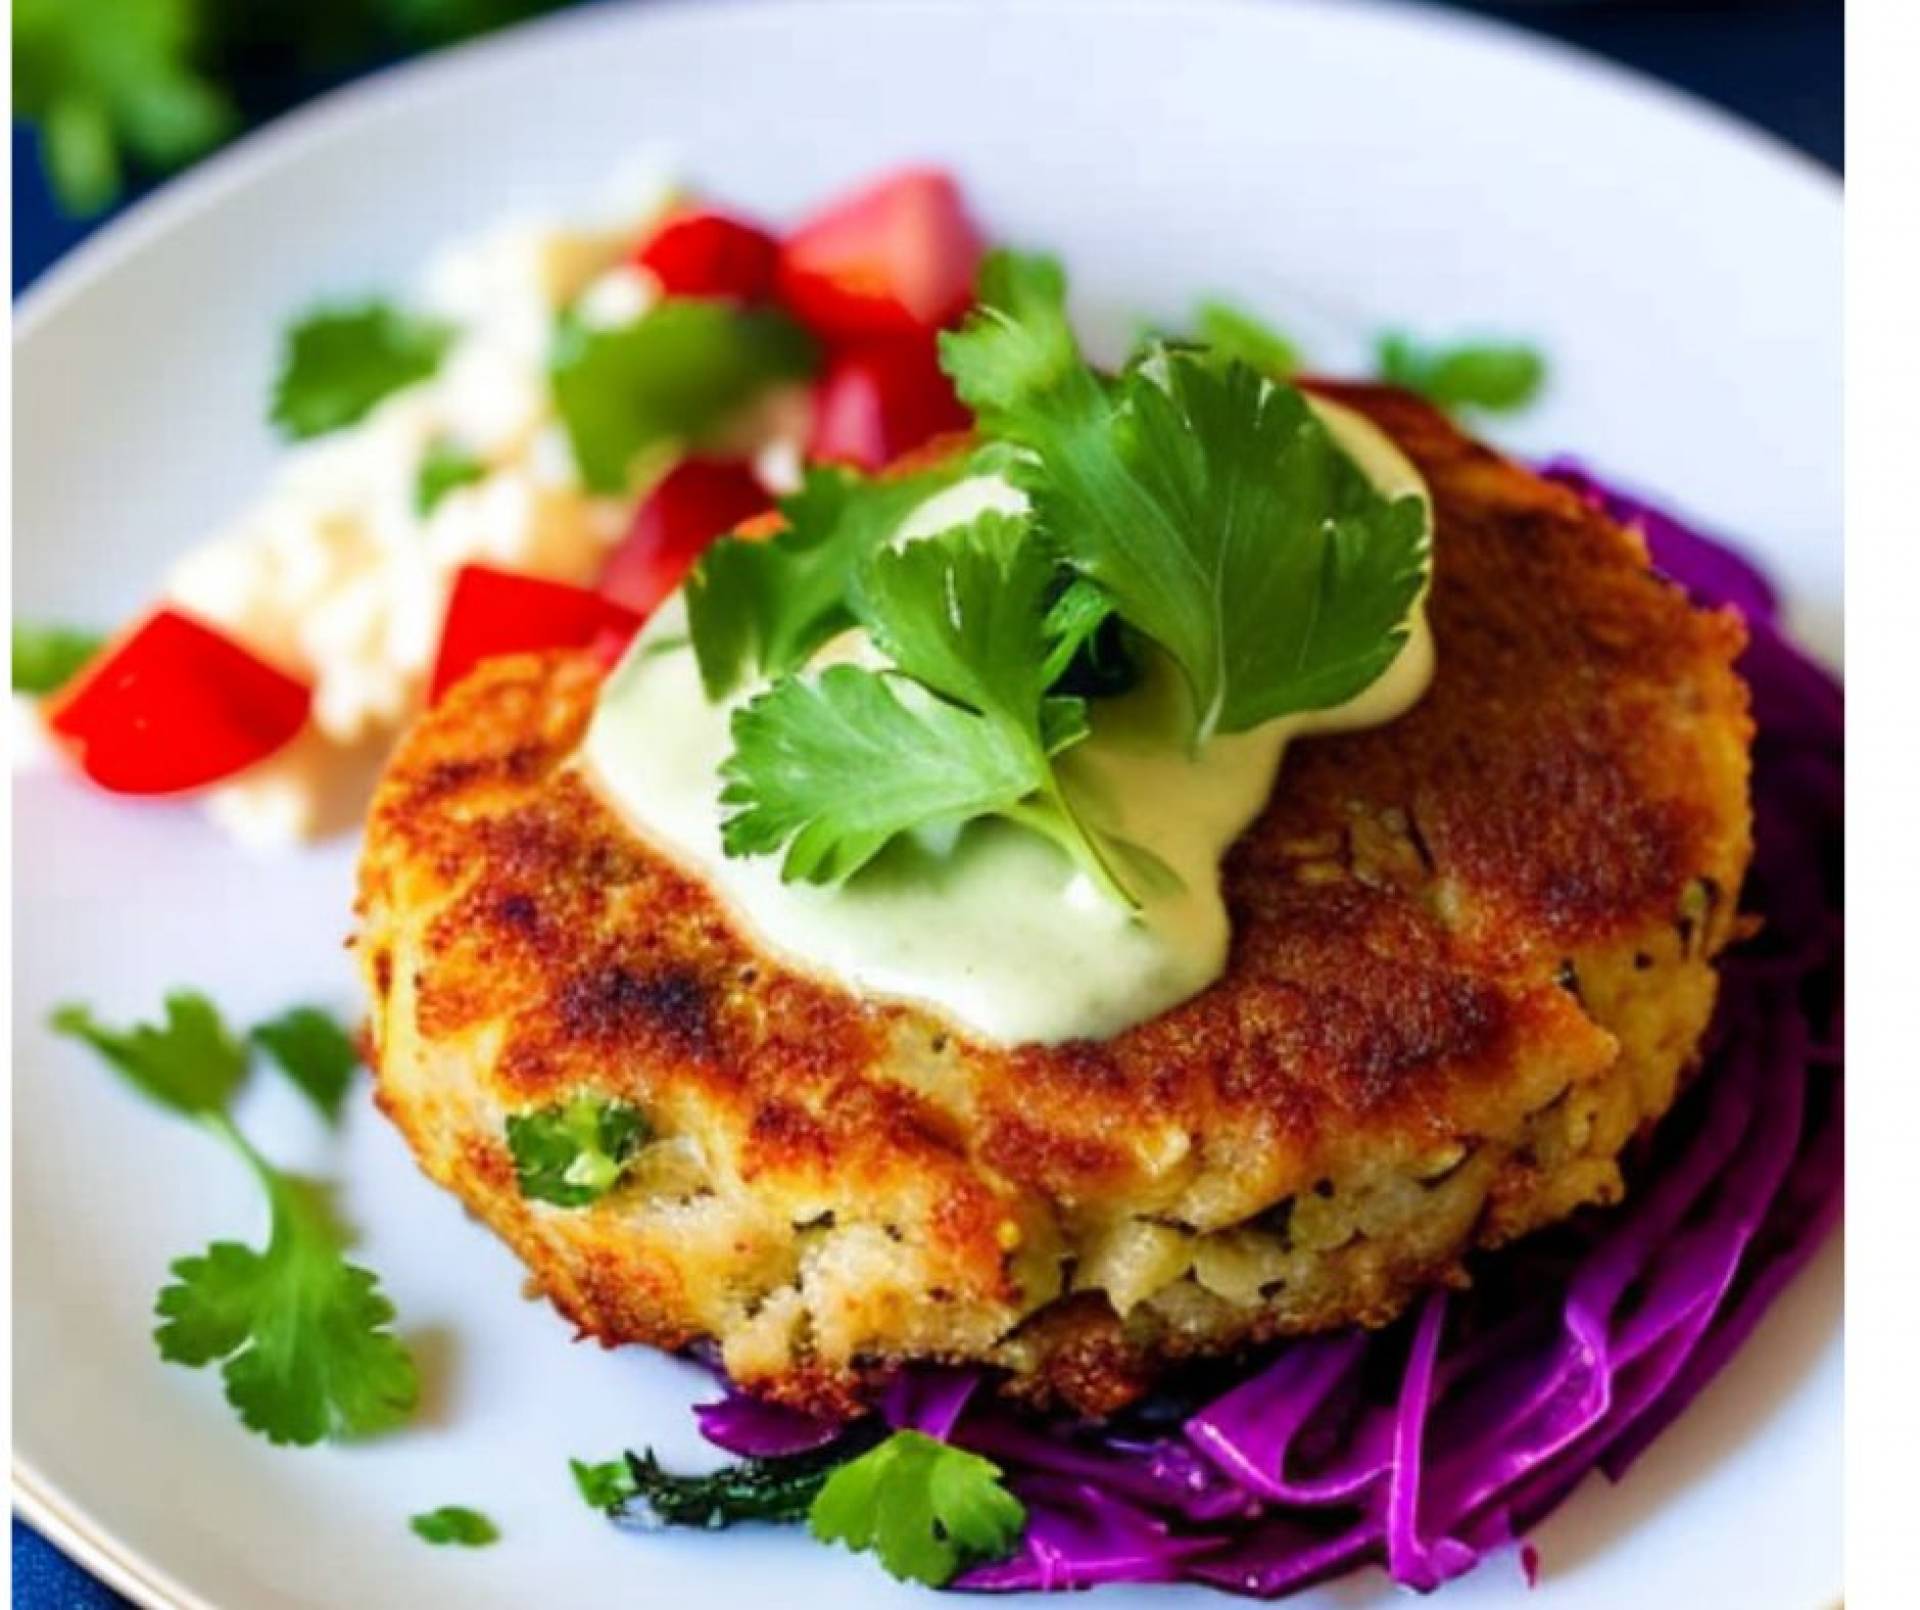 Lump Crab Cakes with Shredded Cabbage Slaw and Garlic Aiolig